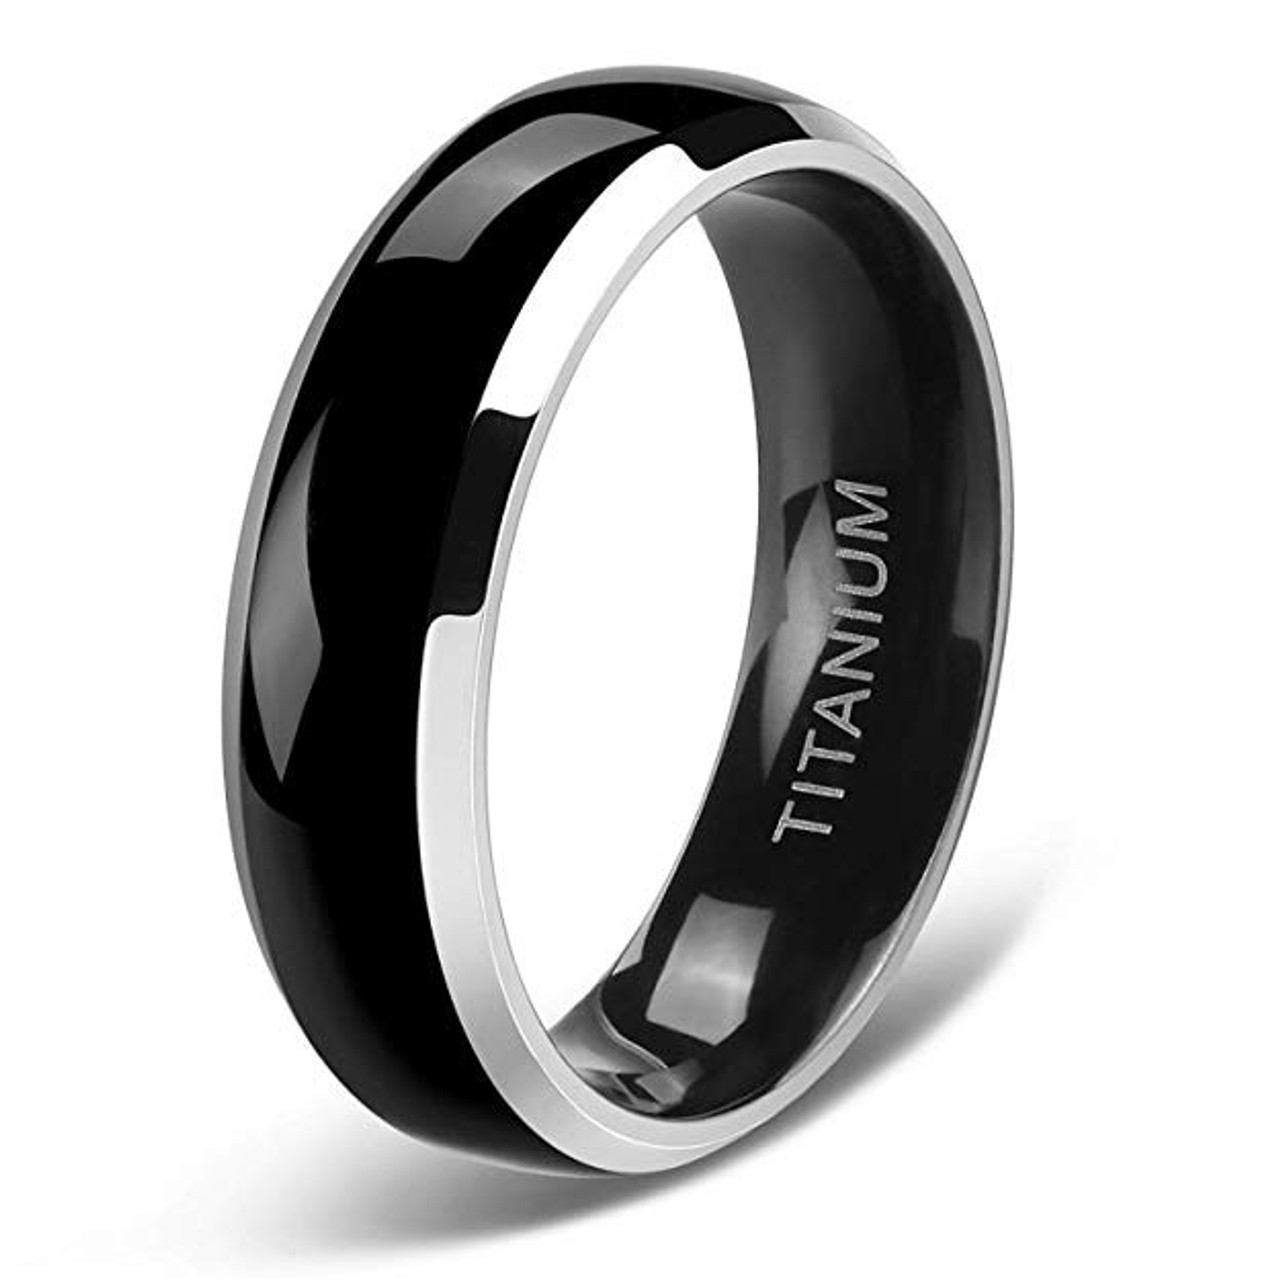 6mm - Unisex (Women's or Men's) Black and Silver Two Tone Titanium Wedding Bands. High Polish Finish - Comfort Fit Ring is Light Weight